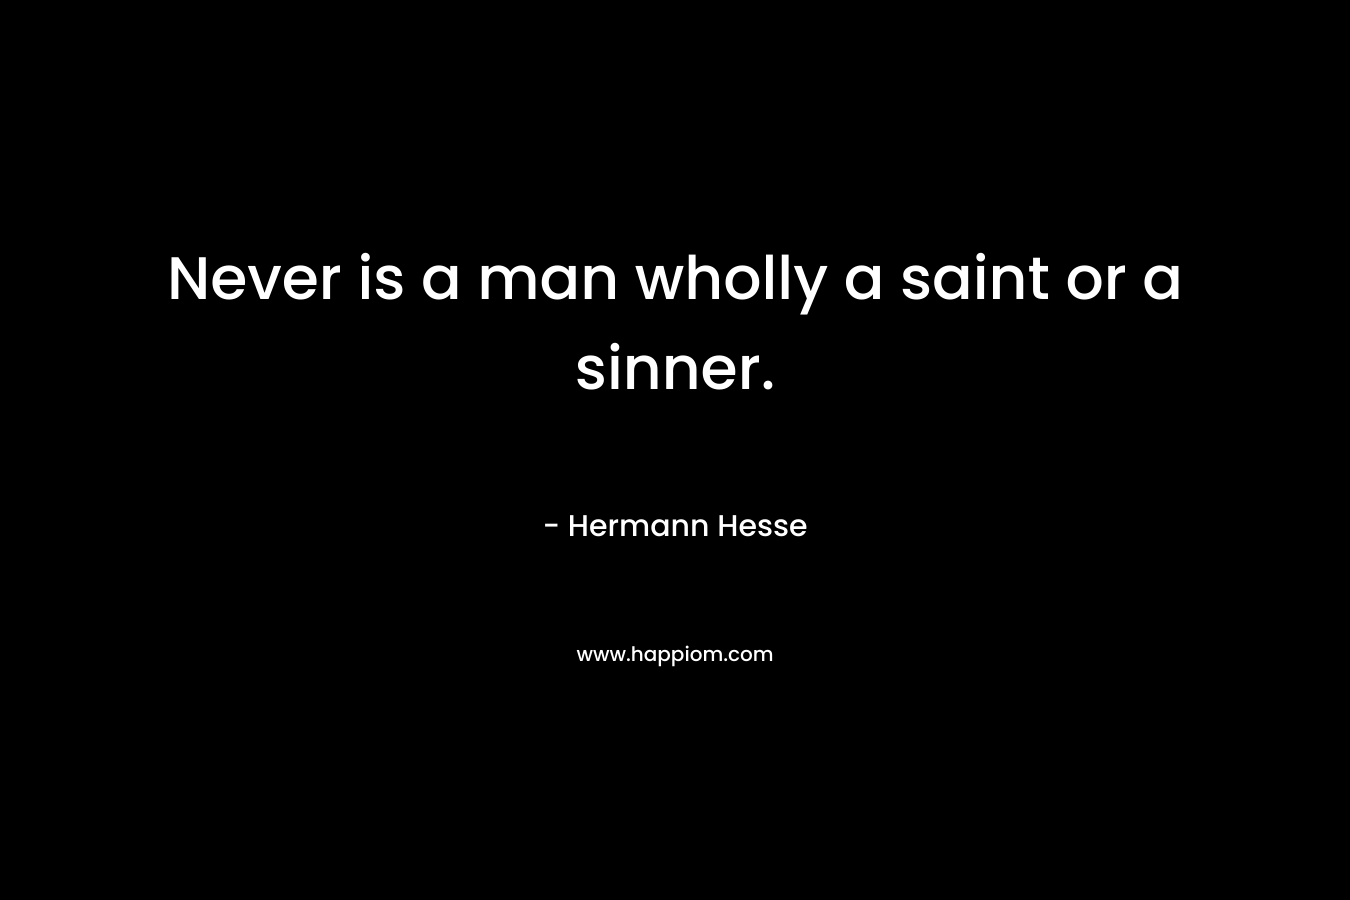 Never is a man wholly a saint or a sinner. – Hermann Hesse